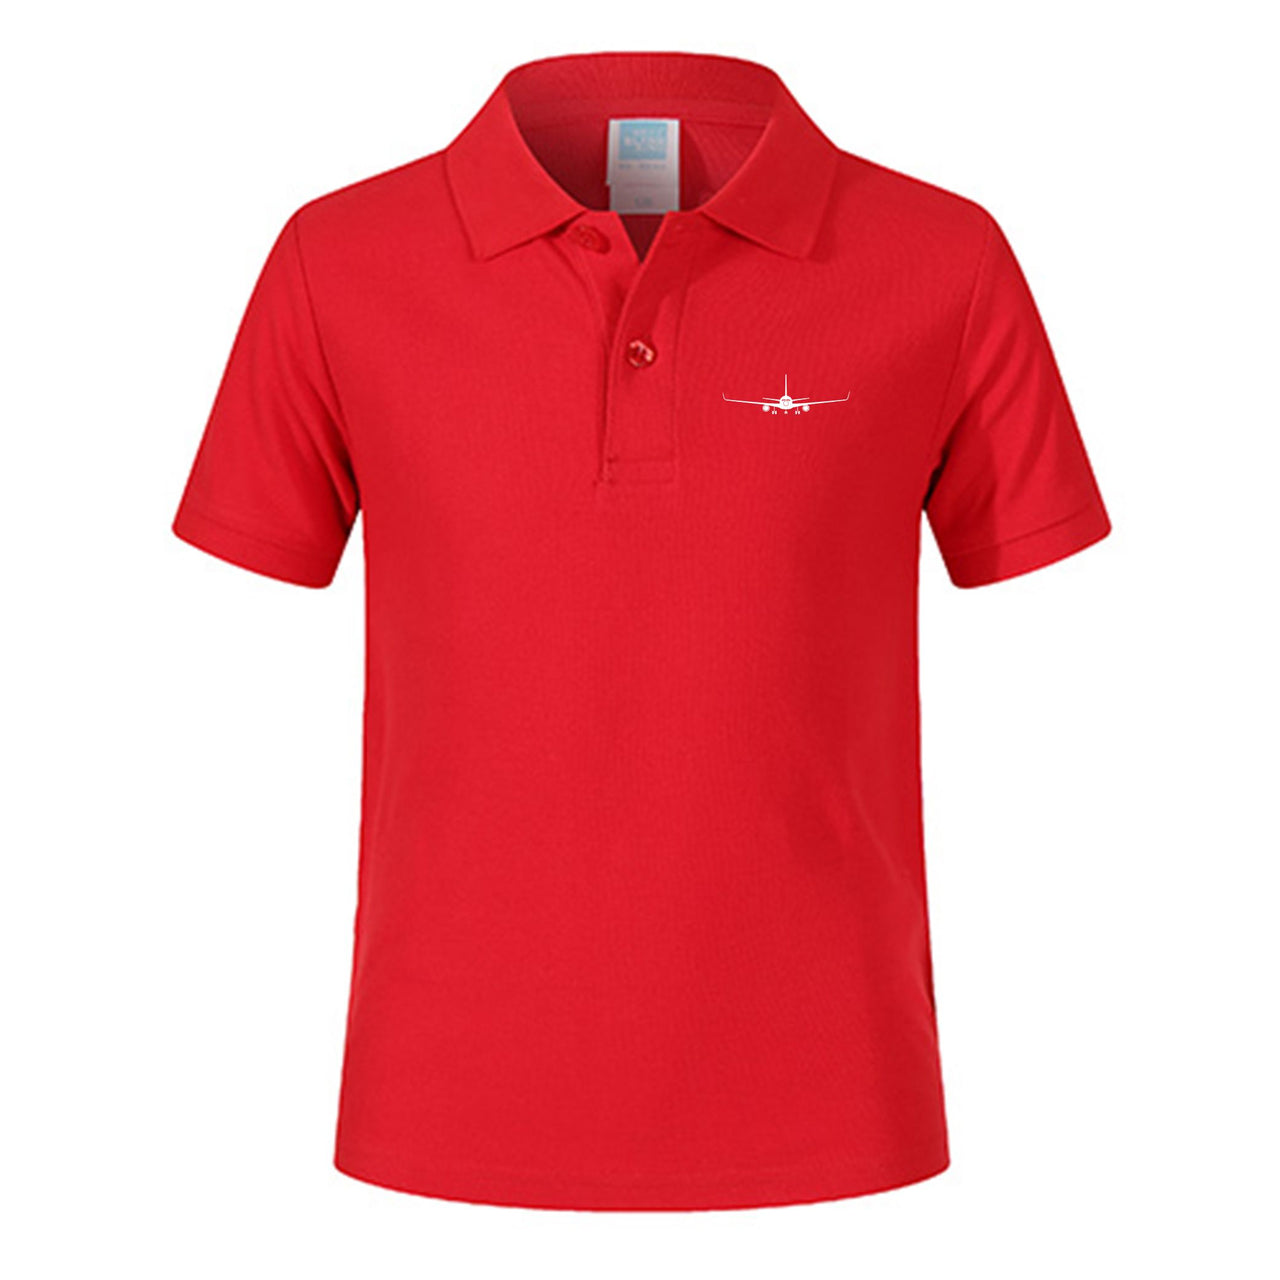 Boeing 767 Silhouette Designed Children Polo T-Shirts